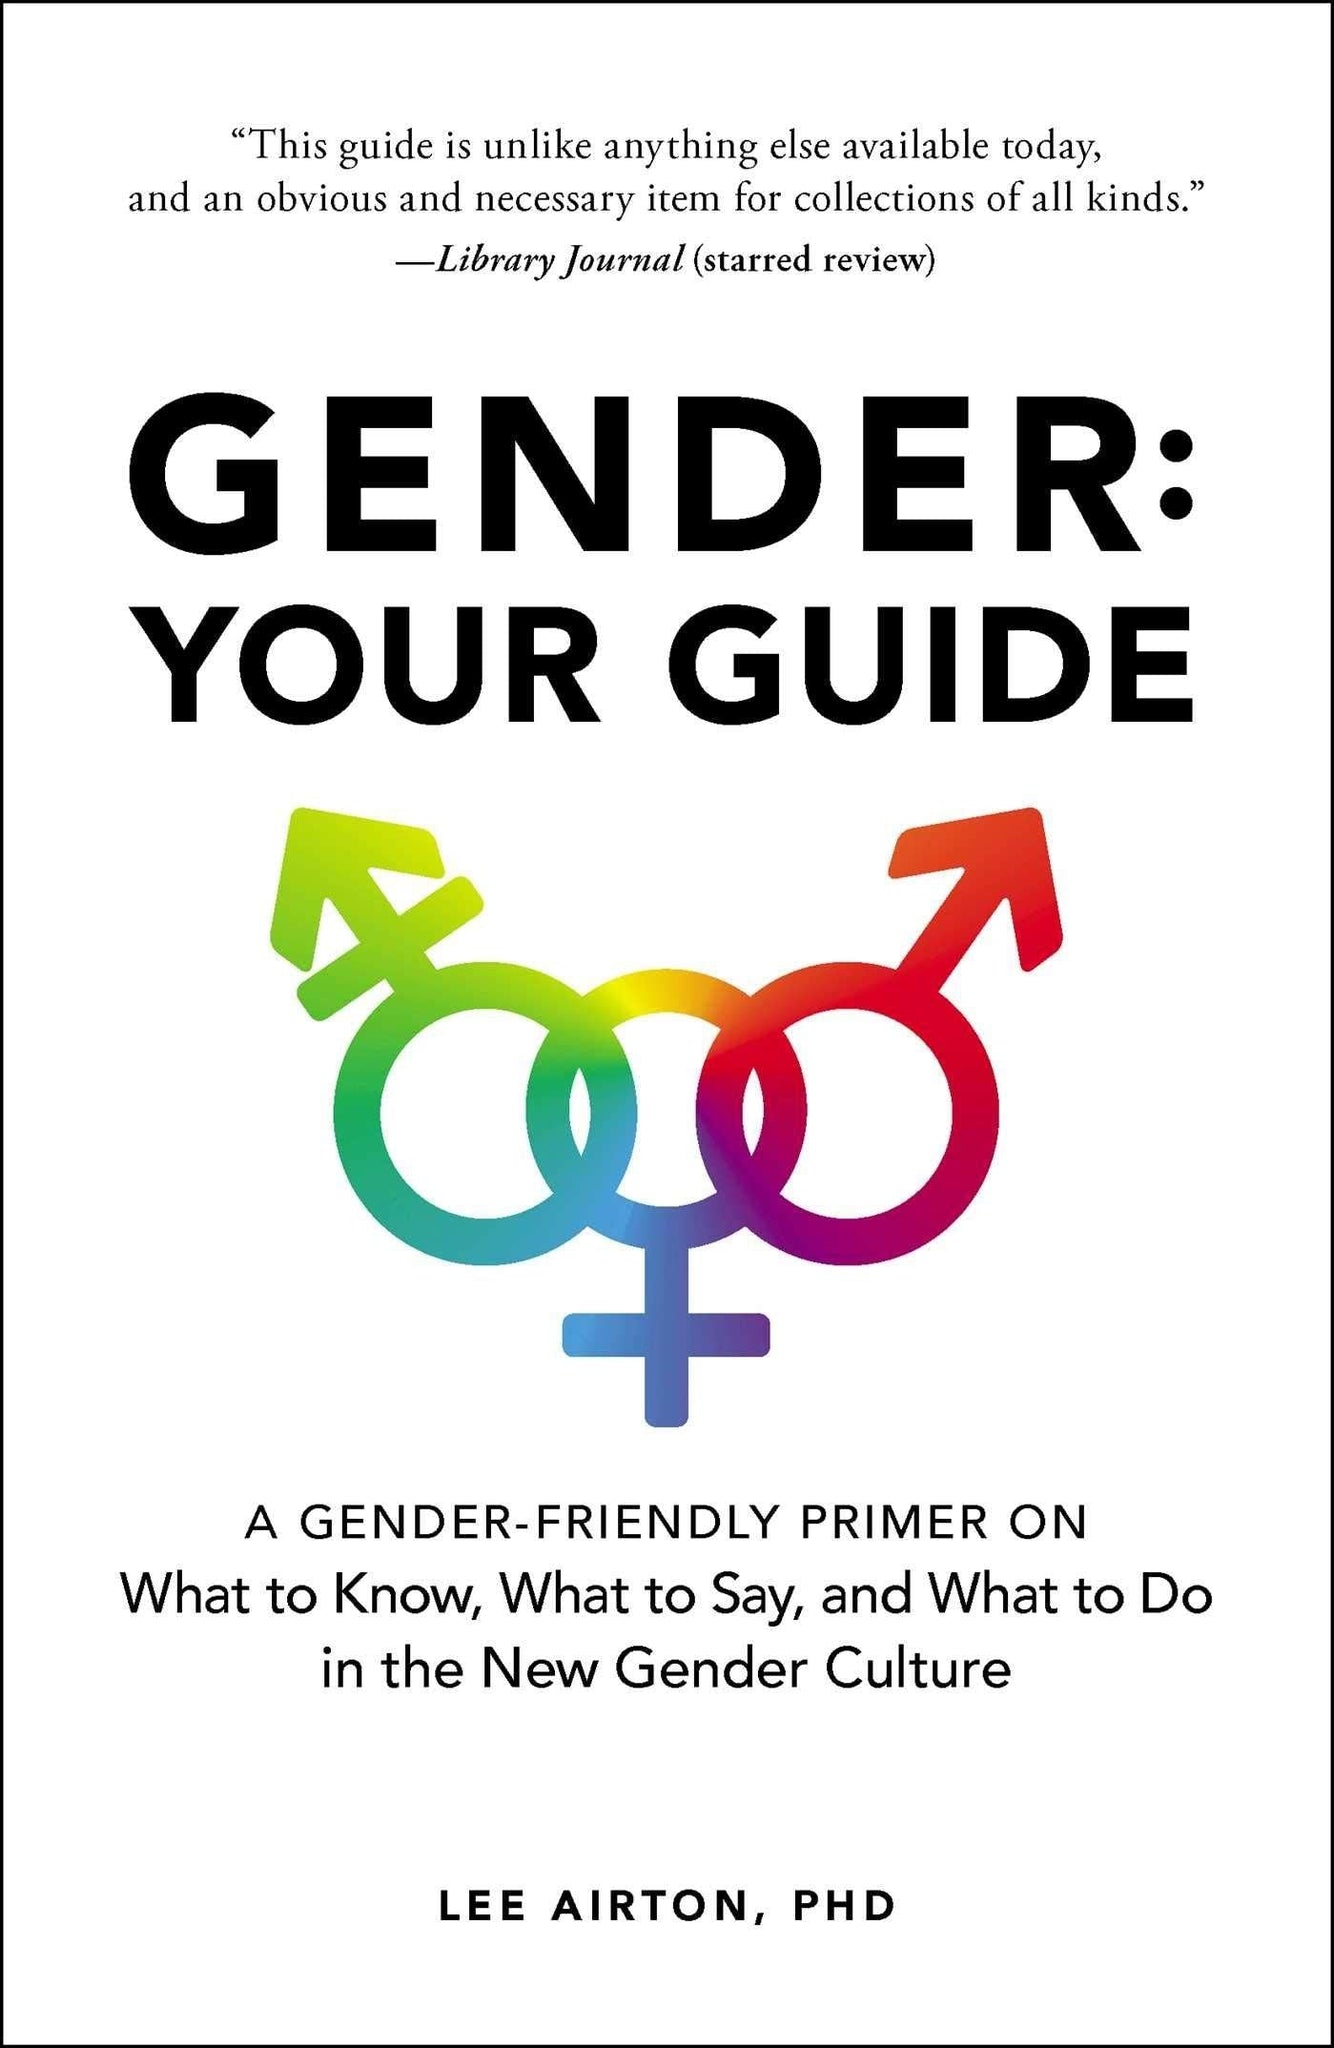 Gender: Your Guide: A Gender-Friendly Primer on What to Know, What to Say, and What to Do in the New Gender Culture - ShopQueer.co